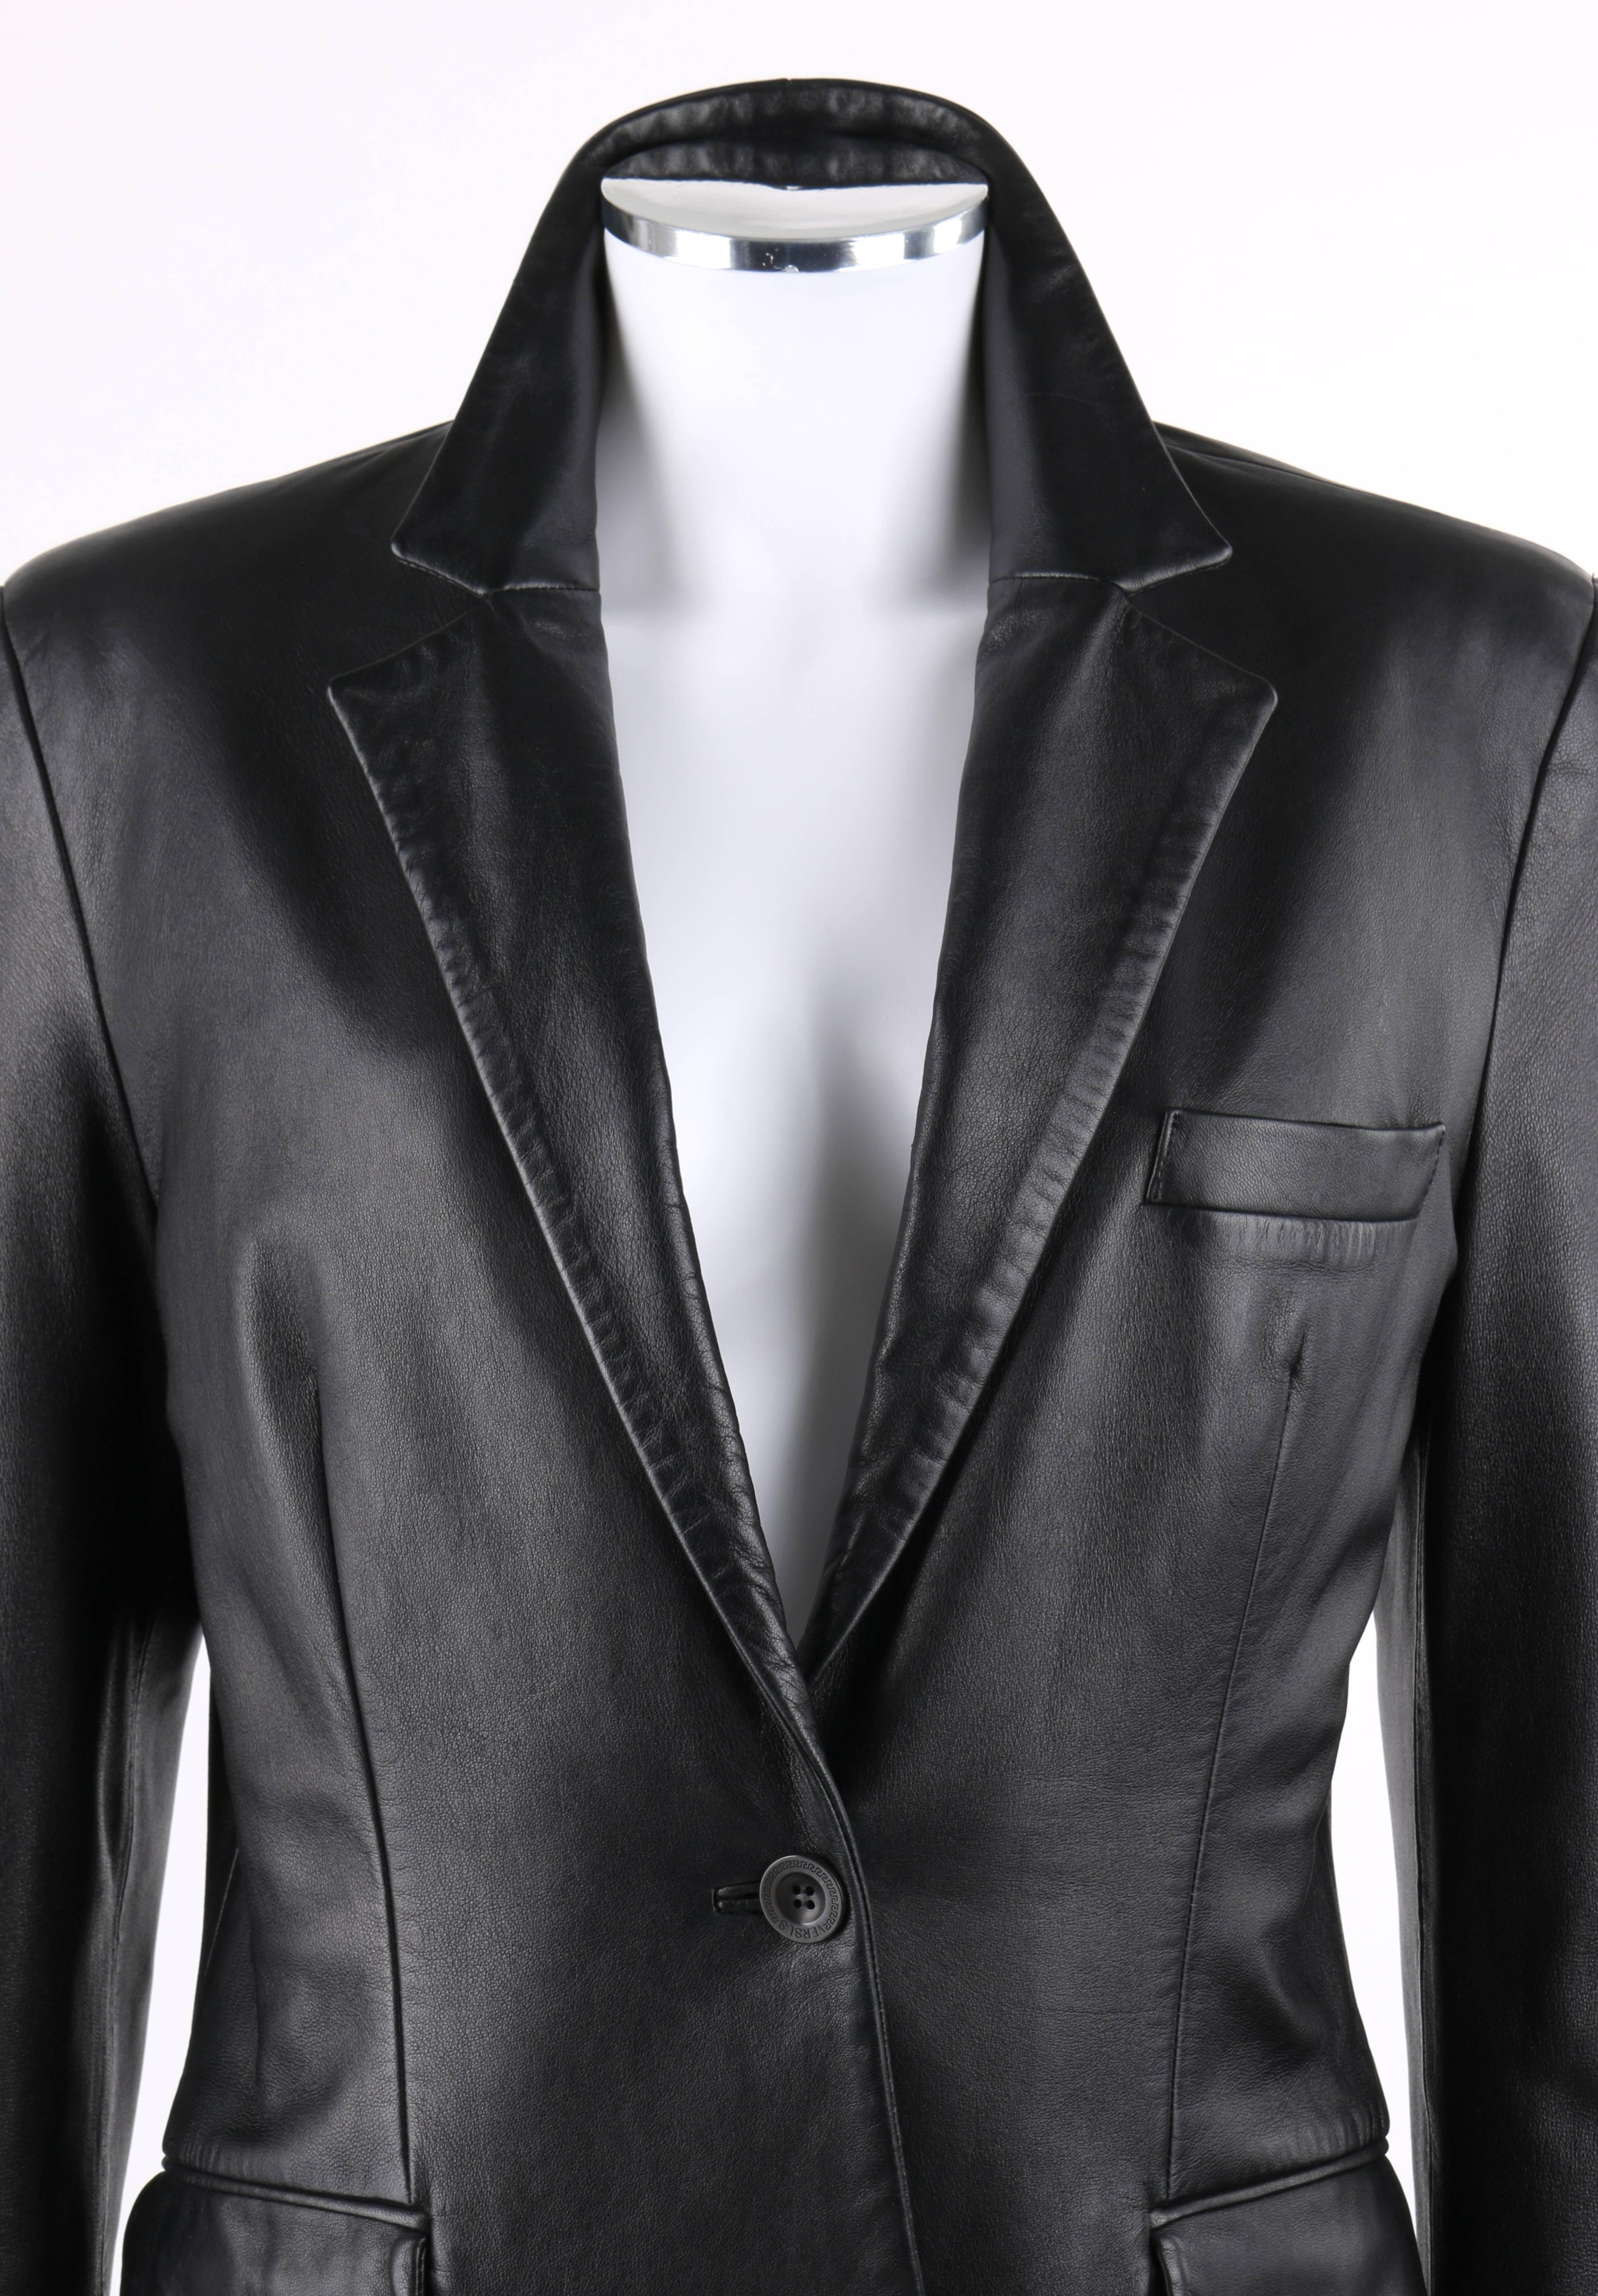 Versus by Gianni Versace c.1990's black leather single button blazer. Notched lapel collar. Long sleeves with single button closure at cuff. Center front single button closure. Black 